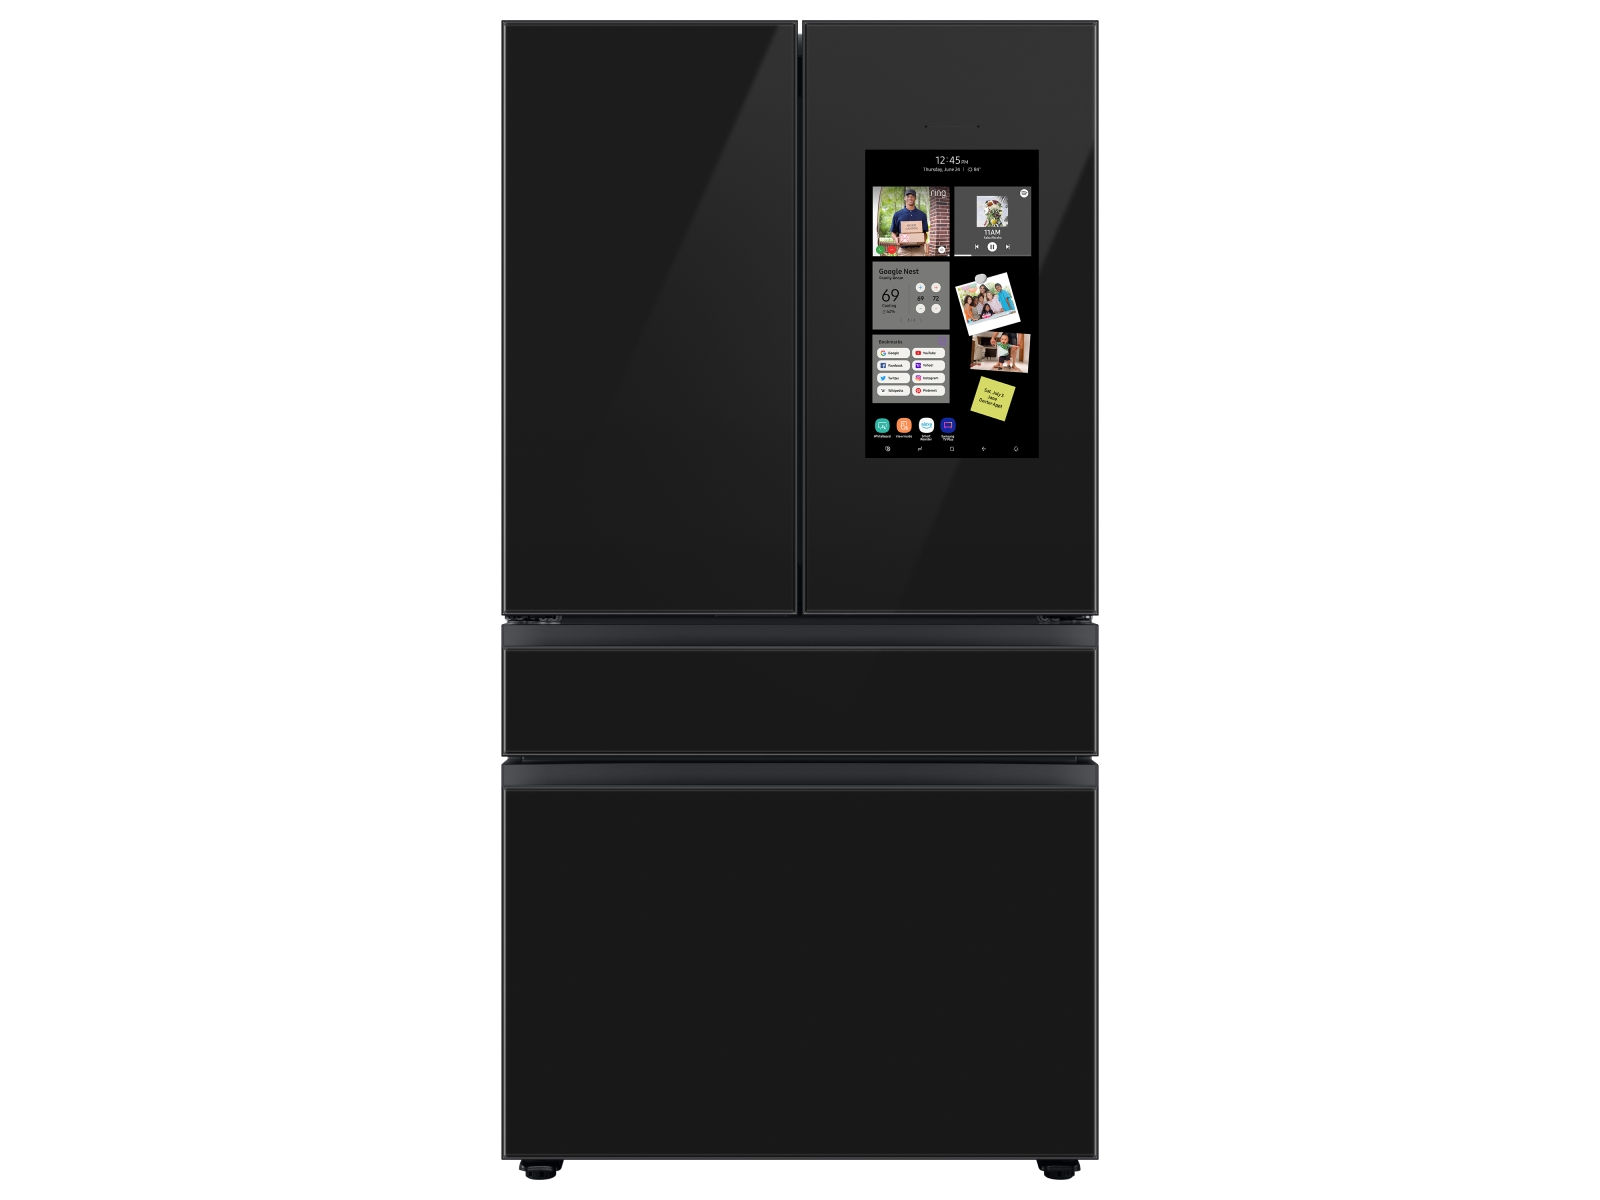 Bespoke 4-Door French Door Refrigerator (23 cu. ft.) – with Family Hub™ Panel in Charcoal Glass – (with Customizable Door Panel Colors) in Charcoal Glass